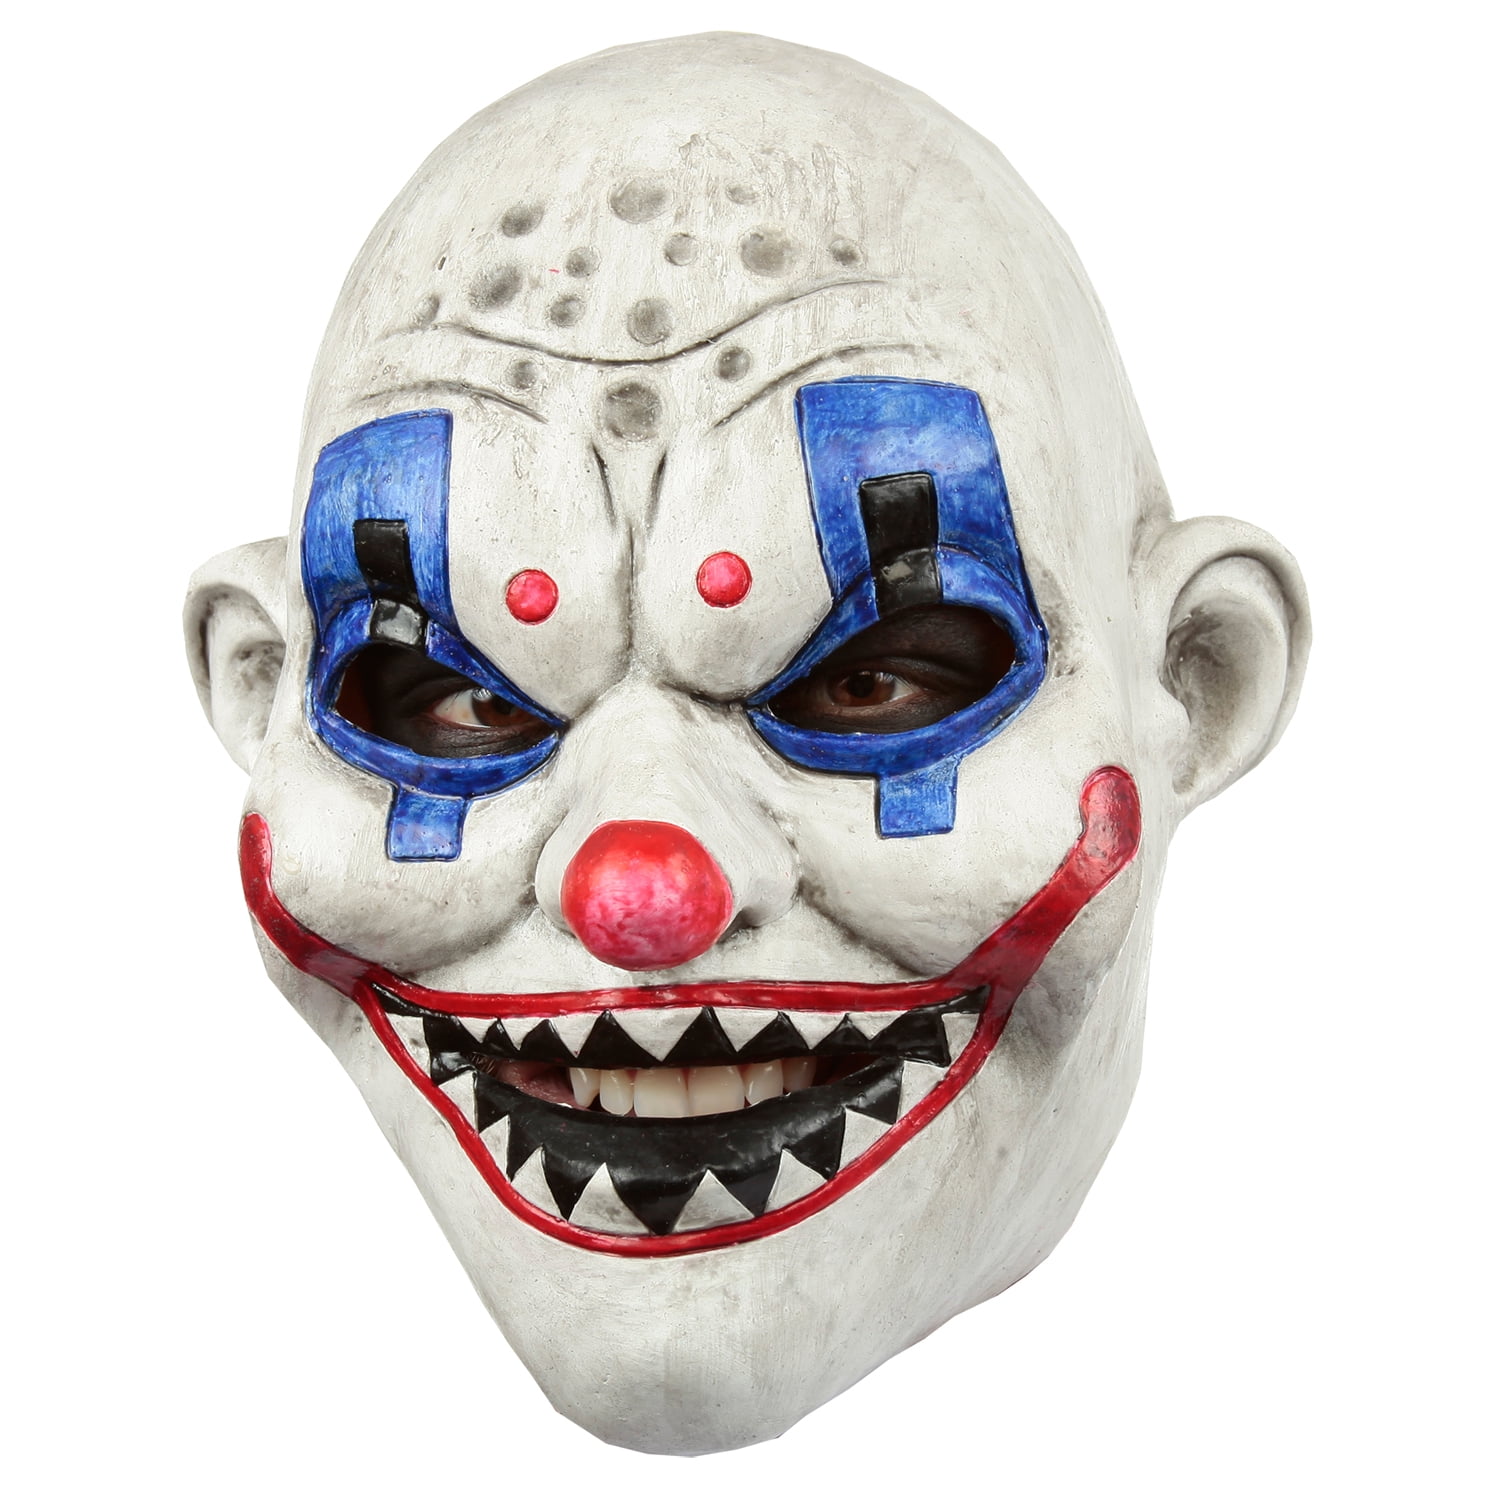 HALLOWEEN ADULT CHOMPO THE CLOWN HORROR MASK PROP 